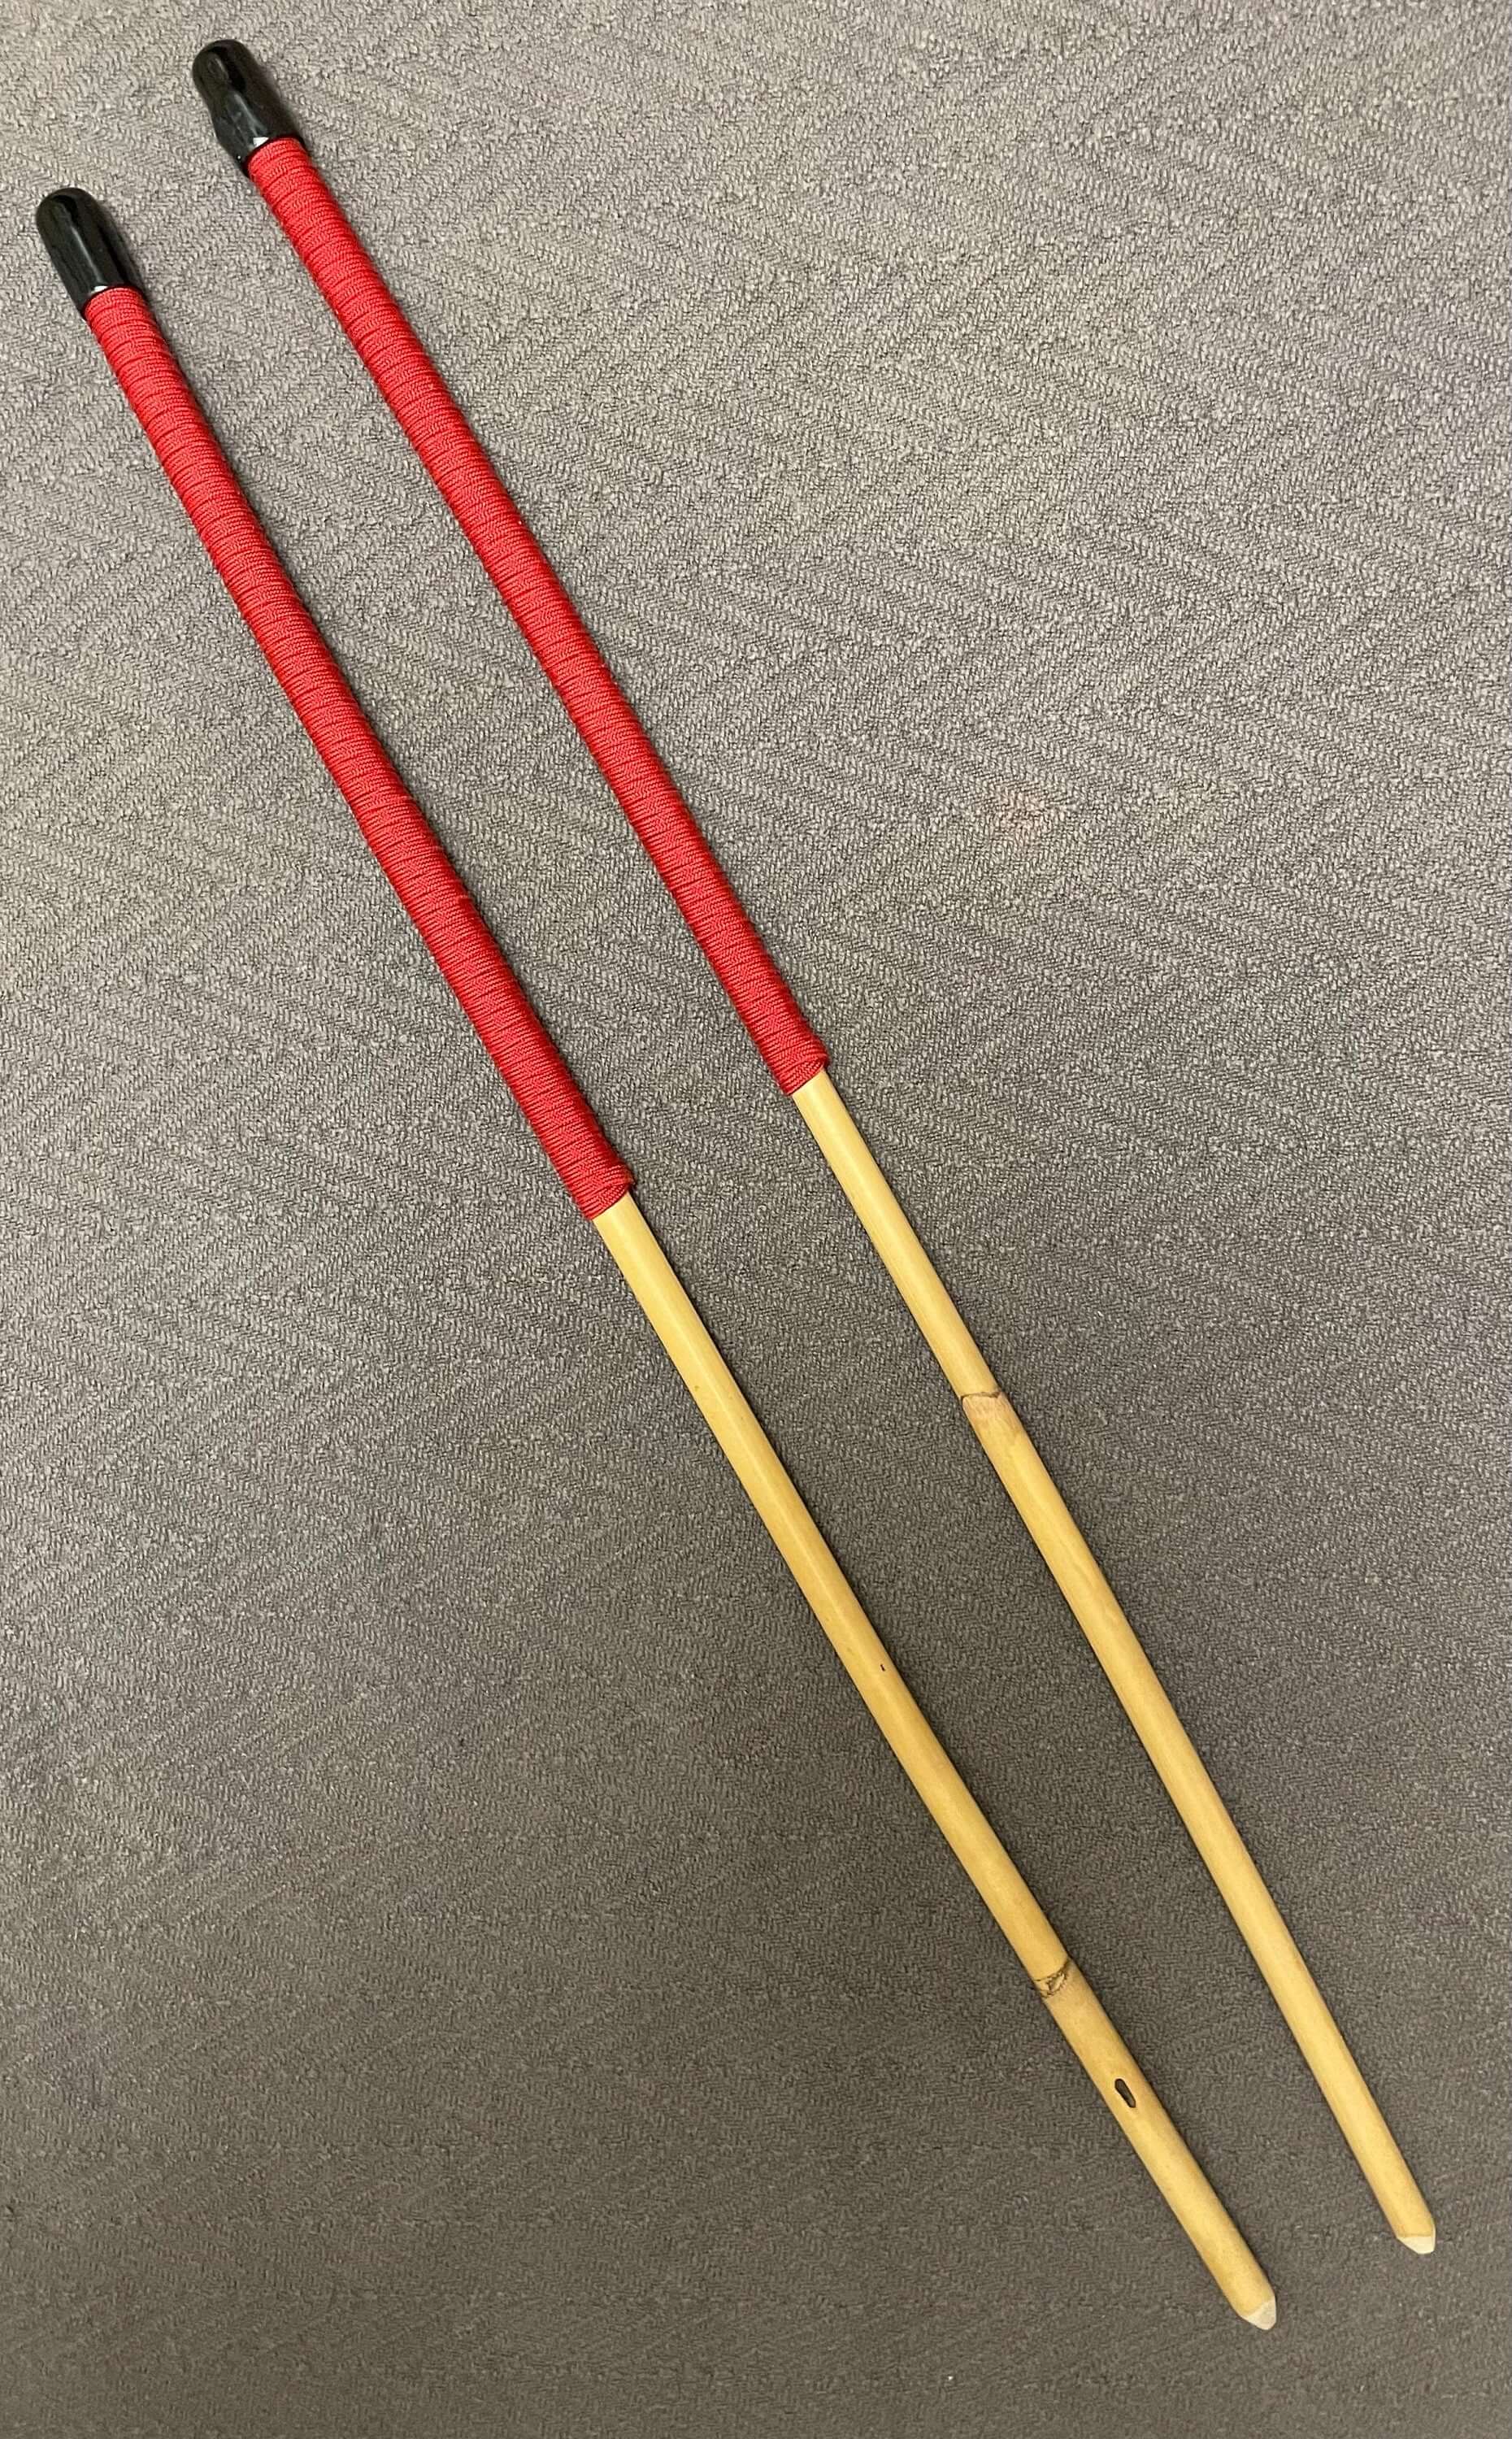 OTK Dragon Cane Pair - 55 to 58 cms with Red Paracord Handles